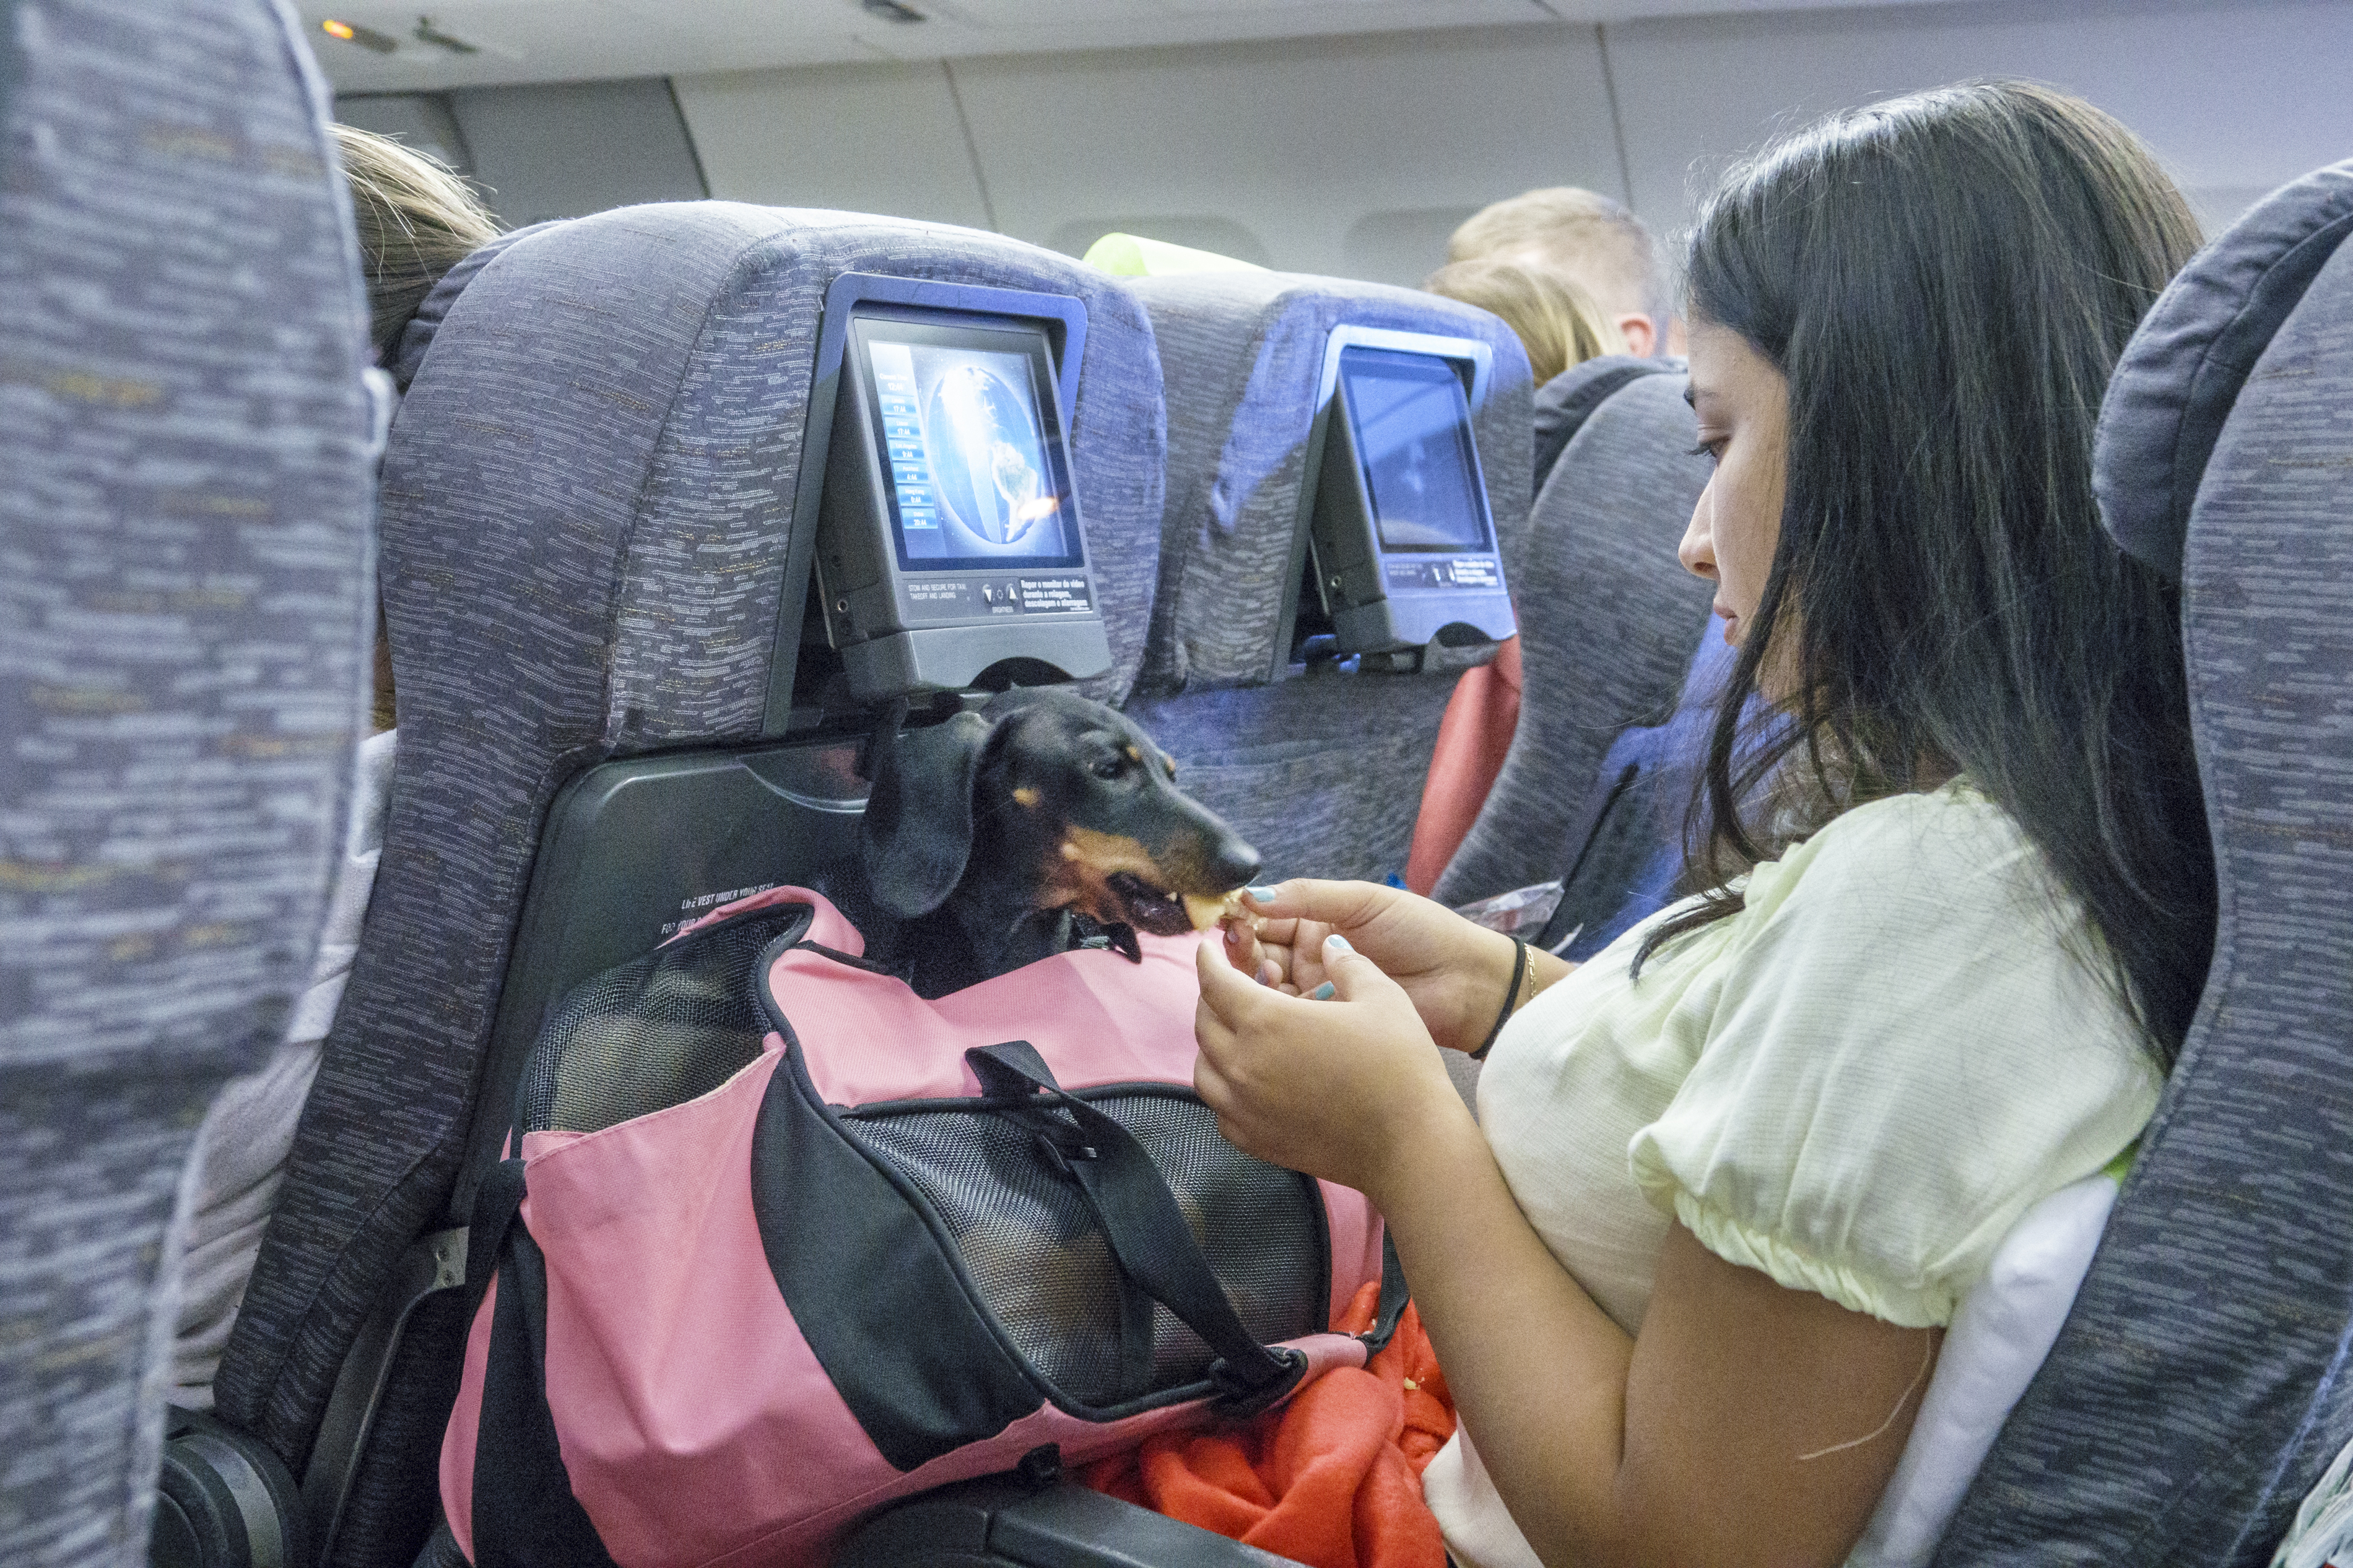 airlines that allow dogs flying with a dog in cabin airlines that allow dogs in cabin flying with pets pet flights dog flights airlines that allow pets in cabin airlines that fly dogs airlines that allow dogs in cargo airlines that allow pets flights that allow dogs air travel with dogs air pets pet cargo airlines dog airline pet travel airlines airlines travel dog flight carrier pets allowed in flight pets are allowed in flight dogs are allowed in flight flights that allow dogs in cabin cargo flights for dogs cargo pet travel pet air travel in cabin pet carrier flying pets in cargo dog in cabin flight flights with dogs in cabin dogs allowed in flights pet cargo flights dog travel in flight airlines that fly dogs in cargo dog cargo airlines dogs that fly in cabin dog carrier dogs in cabin airlines dog carrier for flying dog air which airlines fly dogs dogs traveling in cargo flights for dogs in cabin dogs and flying airlines and dogs airlines that allow pets in cargo travel with dog in flight airlines that fly dogs in cabin air travel dog carrier air travel with dogs in cabin airlines allowing dogs in cargo dog air travel carrier any airlines flying in cabin with dog flying dog in cabin dog is allowed in flight airlines to fly with dogs dog in air flights that allow dogs in cargo travel with dog in cabin airline cabin dog carrier a dog flying which flight allows pets dogs in flight cabin flight with dogs allowed airlines with dogs in cabin flights that allow pets in cabin airlines that allow dogs to fly dog in cargo flight dog airline cargo dog travel airline cargo airlines flying with dogs air cargo for dogs dog air carrier airlines that allow in cabin pets airlines that allow pet travel airline travel dog carrier flights to europe airline flights flying with a dog air travel air flight fly airlines low cost flights european airlines dog flight cost dog airline carrier cargo flight fly air flight cost travel flights dog cabin cost to fly a dog low cost airlines europe pet airlines flights in europe cargo dog low cost flights europe flying dogs in cargo fly flight fly cargo pet flight cost i fly airlines flying with a small dog airlines for europe european cargo airlines flight cabin low cost fly travel with dog to europe european air airlines that accept dogs dog travel airlines low flight flying with air flying air any flight small dog airline carrier flying with small dog in cabin airlines that allow small dogs in cabin flights from europe small flights airlines that fly from airlines that accept pets airlines that allow dogs in cabin europe europe air travel air travel to europe airlines that fly to europe dog in cabin flying a dog in cargo cost cost to fly dog cargo low cost carriers europe flying to europe with a dog flight to europe cost cost to fly a dog in cargo cost of flying dog in cargo airlines accepting pets in cargo european carriers dogs carriers traveling with a small dog air travel in europe cost for dog to fly cost to travel with a dog which airlines accept dogs cabin dog flights with pets in cabin european airlines that allow dogs europe by air european airlines that allow dogs in cabin airline flights for dogs flights that accept dogs small dog flight carrier low cost airlines to europe airlines that accept dogs in cargo fly on dog air travel with small dog airlines that accept dogs in cabin fly the dog dog flight cargo flights dogs allowed small dogs flying in cabin air flights for dogs air travel carrier for dogs cost of flight to europe dogs and flights traveling with dog in cargo airlines which allow dogs in cabin small dog carrier for air travel airlines that accept pets in cabin airlines that accept pets in cargo dogs in the cabin airlines small european airlines dogs allowed in cabin airlines fly on a dog small dogs on flights airlines from europe cargo dog flights small dog airline travel carrier air flights to europe airlines flying to europe airlines that fly with dogs airlines that allow small dogs cost to travel with dog on airlines european airlines that allow pets in cabin cabin for dogs airline flights to europe cost to fly dog in cargo cost of dog travel by air cost of traveling with dog flights which allow dogs airline travel with dogs in cabin cost of flying a dog in cargo low cost fly europe flights allowing dogs in cabin flying with a dog to europe airlines that travel to europe in cabin dog travel dogs and air travel european air carriers airlines that allow dogs to fly in cabin cost for dog on flight flying small dogs on airlines airline cost for dogs airlines that allow dogs europe europe flight cost airlines that allow pets in cabin europe airlines that allow small pets in cabin cost of dog on flight flying pet dog flying with dogs in europe europe to europe flights europe air cargo flying with a pet dog airlines that allow dogs as cargo flying with a small dog in cabin flying with dogs europe airlines that allow pet in cabin cost to travel with dog dogs allowed on airlines airline pet carriers for dogs small dog carriers for airlines dog flying as cargo airlines that allow pets to fly airlines that allow pets to fly in cabin dogs to fly flights to and from europe airlines to fly to europe air to europe cost for flying with a dog dog airline flights travel flights to europe airlines that allow dogs flying with a dog in cabin airlines that allow dogs in cabin flying with pets pet flights airlines that allow pets in cabin airlines that fly dogs pet airlines airlines that allow dogs in cargo pet cargo airlines dog flight cost airlines that allow pets flights that allow dogs air pets pet travel airlines pet flight cost air travel with dogs pets allowed in flight pets are allowed in flight dogs are allowed in flight cargo pet travel pet air travel dog airline flights that allow dogs in cabin flying pets in cargo airlines that accept pets pet cargo flights airlines that accept dogs dogs allowed in flights cargo flights for dogs dog travel in flight dog travel airlines airlines that allow small dogs in cabin dog in cabin flight flying with small dog in cabin flights with dogs in cabin airlines that allow pets in cargo dogs that fly airlines that fly dogs in cargo dog cargo airlines airlines and dogs which airlines fly dogs dogs traveling in cargo travel with dog in flight which flight allows pets pet friendly airlines jetblue pet policy airlines that allow large dogs in cabin air canada pet policy dogs on planes dog friendly airlines flying with large dog in cabin traveling with a dog on a plane flights for dogs air canada pet cargo air canada pets dogs flying on planes dogs on airplanes taking a dog on a plane pets on planes best airline for pets jetblue pets jetblue dog policy airline pet policy pet friendly flights rabbit flights traveling with cats on a plane international airlines that allow cats in cabin flying with cats in cabin dog plane ticket best airline to fly with pets air canada flying with pets traveling with a cat on a plane airlines that ship dogs air canada dog policy air canada pet in cabin most pet friendly airlines best airlines for dogs shipping dogs by air air canada pet travel pets on airplanes jetblue pet travel dog flight ticket pet flight ticket flying with a puppy in cabin jetblue pet cargo taking a cat on a plane pet shipping airlines jetblue flying with pets best airlines to ship pets bringing a dog on a plane flying a dog in cargo pet transport airlines pet friendly airlines in cabin best airline to travel with pets best airline to fly with dog pet air transport shipping pets by air dogs flying air canada pet shipping jetblue animal policy airlines that allow large dogs in cabin 2021 dog friendly flights dog airline ticket taking pets on a plane cat flight dogs on planes rules dogs on international flights air canada pet policy international flights shipping a puppy by plane airlines that let you fly with dogs transporting dogs on planes traveling with a puppy on a plane jetblue pet policy cargo airline dog policy animal cargo flights pitbull friendly airlines airlines that allow large dogs cat friendly airlines best pet friendly airlines dogs allowed on planes pet friendly international airlines pet plane tickets airlines that allow rabbits pet airways cost bringing a cat on a plane bunny flights bringing cat on plane dog carry on plane airlines that fly pets air canada dogs taking your dog on a plane shipping puppies by air pitbull friendly airlines 2021 dog plane ticket cost airlines that take dogs airline that allows large dogs in cabin best airlines to ship pets internationally cost of pet transport by air taking my dog on a plane best airline to fly pets in cargo carry on pet flying a puppy on a plane pet friendly airlines 2021 air canada pet cargo cost taking a puppy on a plane cat flight ticket price air travel with cats dog flight ticket price air canada pet transport flying with your dog in the cabin international airlines that allow pets in cabin airlines that allow large dogs in cargo cheap flights with pets flying with your pet international pet travel airlines jetblue dog policy 2021 cost to bring dog on plane airlines that transport dogs airplane travel with dog cat in cabin international flight air canada cat in cabin jetblue large dog policy traveling with rabbits on airplanes jetblue airlines pet policy jetblue pet policy in cabin cheapest airline to fly with pets airline rules for dogs pets on international flights cat flying on plane dog only airline air canada animal cargo do airlines allow pets jetblue flying with dog dogs on airplanes rules air canada dog cargo most dog friendly airlines jetblue dogs puppy flights dog friendly airlines 2021 jetblue pet in cabin flights for dogs only bring pet on plane best airline for flying with dog dog allowed in plane taking pets on flights do dogs fly airlines that allow big dogs in cabin pet airline ticket air canada in cabin pet airlines dogs in cabin dog flight transport flying your dog in cargo flying with a dog air canada traveling with birds on airlines book flight with pet dog ticket flight dog in airplane cabin best airline to travel with dogs animals allowed on planes cat plane ticket airlines that allow pets in cabin to hawaii air animal transport airlines that allow cats air canada dog in cabin air canada animal transport carrying pets in flight best airline for large dogs taking dog on airplane rabbit friendly airlines small dogs on planes pet in cabin airlines dog air transport fly with my dog in cabin pet safe airlines dog ticket in flight best way to fly with a dog jetblue cat policy airlines that let dogs fly in cabin pitbull friendly airlines 2020 flights for pets only book a flight for a dog animal flight transport pet travel in flight which airlines fly pets jet airways pet policy pets allowed on planes puppies on planes airlines and pets large dogs on planes pet air cargo large dog in cabin flight pet flight ticket price jetblue jet with your pet bringing a puppy on a plane best airlines for pets in cabin traveling with small dog on plane pet airlines international dog in cabin international flights big dogs on planes airlines that allow rabbits in cabin best dogs for plane travel flights for dogs prices air canada fly with dog pet flight transport cat flight ticket air canada dog travel dogs that can fly on planes airlines that allow cats in cabin international pet friendly airlines usa best airlines for pets international flying animals pets taking dog on flight airlines that allow guinea pigs dog flying airplane pets by air puppy flying on airplane best flights for dogs cost to take dog on plane pet travel flights pet only airlines large dog friendly airlines cheapest airline for pets dogs that can travel on planes which airlines transport dogs bird friendly airlines flight with pet in cabin pet friendly airlines flying with pets pet flights pet cargo airlines pet airlines airline pet policy best airline for pets air pets airlines that allow pets in cabin airlines that allow pets pet friendly flights best airline to fly with pets pet travel airlines pet flight cost pet transport airlines cargo pet travel pet air travel pet friendly airlines in cabin best airline to travel with pets pet air transport flying pets in cargo pets allowed in flight pet cargo flights pets are allowed in flight best pet friendly airlines carry on pet airlines that fly pets airlines that accept pets flying with your pet cost of pet transport by air best airline to fly pets in cargo airlines that allow pets in cargo carrying pets in flight pet in cabin airlines which airlines fly pets airlines and pets pet air cargo best airlines for pets in cabin pet flight transport pet friendly airlines usa pets by air pet travel flights pet travel in flight which flight allows pets flight with pet in cabin american airlines pet policy american airlines pet cargo american airlines pets american airlines pet travel airline pet carrier american airlines flying with pets hawaiian airlines pet policy best airlines us airlines pet travel major airlines american airlines cargo pet american airlines pet fee fly airlines hawaiian airlines pet cargo may airlines pet policy american airlines carry on pet best pet carrier for flying american airlines pet in cabin travel airlines american airlines pet cargo cost american airlines pet transport best airline pet carrier can airlines american airlines in cabin pet hawaiian airlines pet travel airline pet fees in cabin pet carrier carry on pet carrier pet flight service american airlines pet policy cargo american airlines and pets american pet cargo american airlines pet travel cargo hawaiian airlines pets american airlines pet travel policy pet cargo american airlines pet in cabin american airlines hawaiian airlines pet in cabin american pet travel main airlines american airlines policy on pets pet flight carrier american airlines pet cost air travel pet carrier american airlines checked pet american airlines pet policy in cabin flying with a pet american airlines american air pet policy best airlines credit cards american airlines carry on pet policy cargo pet carrier hawaiian airlines flying with pets pet carrier for flying american airlines pet in cabin policy hawaiian air cargo pets flying with pet american airlines pet policy for american airlines hawaiian airlines pet carry on american airlines pet flights american airlines allow pets american airlines traveling with a pet american flying with pets airlines with best pet policy american airlines pet in cargo pets in cargo airlines hawaiian air pet policy american air pet cargo pet airfare flying with pets in cabin american airlines flying with a pet airlines that fly pets in cargo american cargo pets american airline pet cargo policy cargo pet friendly american airlines pet transport cargo airline with best pet policy airline pet transportation services pet cabin airlines which airlines carry pets american airlines pet check in cost to fly a pet pet air travel service flights that allow pets in cabin hawaiian airlines pet cargo cost airlines accepting pets in cargo american airlines cargo for pets in cabin pet american airlines hawaiian airlines pet carrier carry on pet fee travel pet carrier airline airline cabin pet carrier pet travel in cabin american pet in cabin cabin pet american airlines airlines all best airline for pets in cargo pet policy on american airlines airline carry on pet carrier flight pet policy american airlines pet friendly any airlines american airlines cargo pet policy american airlines pet service checked pet american airlines flying with my pet travelling with pets in flight airlines that allow pet travel which airlines transport pets hawaiian airlines pet policy cargo cargo pets american airlines pet friendly airlines cargo airlines t airlines that fly pets in cabin american airlines pet cargo flights pet air transportation services american airlines service pet policy pet transport american airlines friendly airlines pet policy hawaiian airlines airline pet cargo services airlines that accept pets in cargo airlines that accept pets in cabin american airlines air cargo pets hawaiian cargo pets best airline to fly with pets in cabin airlines that carry pets airlines that allow in cabin pets air travel with pets in cabin flights for pets cost pet can fly best airlines for flying with pets airlines pets in cargo airlines that allow carry on pets air pet carrier american in cabin pets american airlines flights with pets flying your pet in cargo pet carry in flight airline cargo pet carrier hawaiian pet cargo flights with pet cargo best pet policy airline pet flying policy flying with pets hawaiian airlines american air cargo pets best flights for pets cost of pet travel on airlines american airlines pet policy cost air cargo pets transport service pets in cargo american airlines american airline pet travel cost american air pets pet transport by flight best airline for pet travel in cabin airlines that check pets airlines and pets in cabin pet friendly transport fly cabin air cargo pet carriers us airlines pet policy flying a pet in cargo fly with your pet in cabin pets carriers best airline for flying with pets cabin carrier pet flight fees the best pet carrier for airline travel pet friendly air travel best pet carrier for airline travel in cabin pet flights fly in cabin american airline pet cost airline pet travel policy airlines that carry pets in cargo american pet airlines checked pets airlines pet carrier cabin hawaiian airlines pet transport american airlines checked pet policy pet travel carriers for airlines check in pets airline cost of traveling with pet by air american airline pet cabin us air pet policy airlines that allow pet in cabin flying with your pet in the cabin hawaiian airlines pet travel policy airline travel with pets in cabin pet airline services cost to travel with pet on airlines best airline carrier pet carrier for airline cargo american airline pet flight american airlines pets on flights flying with pets american pet air flights airlines to travel cost of pets on airlines american airline pet cargo cost air flights for pets best airline for pet transport pet airlines usa pet travel airlines cost airlines that allow pets to fly airlines that allow pets to fly in cabin best airline for pet travel in cargo hawaiian air pet travel hawaiian airlines flying pets pet air usa american airline pet policy cargo pet carriers for in cabin air travel airlines flying pets cargo airlines and pet travel us airlines pet travel air pet cargo american airline pet carry on policy pet air service pets in airline cabin pet air carrier service airlines that will fly pets travel air pet carrier american airline pet carrier policy airline flights for pets pets flying as cargo pet air cargo carriers american airlines and flying pets air pet transportation pets and air travel pet flying fees airline carriers for pets pet airline travel cost airlines that allow pets in cabin airlines that allow large dogs in cabin are dogs allowed on planes airlines that allow dogs in cabin can dogs go on planes what airlines allow dogs in cabin can you take dogs on a plane can you take your dog on a plane what airlines allow pets in the cabin taking dogs on planes are pets allowed in flight can you bring pets on a plane weight limit for dogs on planes airlines that allow cats in cabin can you take pets on a plane can you bring your dog on a plane are dogs allowed in flight airlines that allow large dogs in cabin 2021 pets allowed in flight is pet allowed in flight dogs on planes rules can puppies fly on planes which airline allows dogs in cabin is dog allowed in flight dogs are allowed in flight pet friendly airlines in cabin taking pets on a plane can you take a small dog on a plane can you take animals on a plane are dogs allowed in planes does klm allow pets in cabin lufthansa pet policy in cabin which airlines allow cats in cabin which airlines allow large dogs in cabin does lufthansa allow pets in cabin can i bring a puppy on a plane flights that allow dogs in cabin can i bring dog on plane can you take dogs on flights can you fly a dog on a plane does delta allow pets in cabin are dogs allowed on flights what airlines allow cats in cabin can you bring a small dog on a plane does air france allow pets in cabin does qatar airways allow pets in cabin does united allow pets in cabin can i bring my pet on a plane airline that allows large dogs in cabin can i take my pet on a plane dogs allowed in flights airlines that allow pets in cabin singapore does air canada allow pets in cabin alaska airlines pet policy in cabin airlines that allow small dogs in cabin does jetblue allow pets in cabin what airlines allow large dogs in cabin do any airlines allow dogs in the cabin does emirates allow pets in cabin airlines that allow big dogs in cabin international airlines that allow pets in cabin what airlines allow reptiles in cabin airlines that allow large dogs in cargo dog weight limit plane dog in airplane cabin what dogs are allowed on planes can you take pets on flights small dogs on planes do any airlines allow large dogs in the cabin can small dogs travel on planes does aeromexico allow pets in cabin does southwest allow pets in cabin how to travel with a large dog on a plane which airlines allow rabbits in cabin can i take my small dog on a plane can you carry pets on a plane what airlines allow birds in cabin can you bring a big dog on a plane max weight for dog on plane can u take dogs on a plane can you bring big dogs on a plane what is the weight limit for dogs on planes does alaska airlines allow pets in cabin can you take a big dog on a plane can i take my emotional support dog on a plane which airlines allow birds in the cabin can you bring your pet on a plane can you take big dogs on planes does american airlines allow pets in the cabin are dogs allowed in international flights can you take cats on planes can i take a small dog on a plane airlines that allow esa dogs in cabin how to take dogs on plane dogs on flights rules airlines that allow birds in cabin dogs allowed on flights airlines that let dogs fly in cabin does british airways allow pets in cabin can i bring a small dog on a plane can i bring my small dog on a plane can you carry a dog on a plane does swiss air allow pets in cabin airlines that allow puppies in cabin can small dogs go on planes does philippine airlines allow pets in cabin can u bring pets on a plane does iberia allow pets in cabin can you travel with your dog on a plane southwest pet policy in cabin max size dog on plane does delta allow rabbits in cabin does hawaiian airlines allow pets in cabin can i bring my dog on a plane with me airlines that allow cats in cabin international can you bring puppy on plane how to take a big dog on a plane does virgin atlantic allow pets in cabin can you fly dogs on a plane can you travel with pets on a plane are pet dogs allowed in flights is dogs are allowed in flights airlines that allow medium dogs in cabin what airlines allow big dogs in cabin can you bring a large dog on a plane are dogs allowed on a plane can you take a large dog on a plane does korean air allow pets in cabin bringing my dog on a plane does dogs are allowed in flight flights with pets in cabin does turkish airline allow pets in cabin can we take pets on flight flights that allow pets in cabin airlines that allow dogs in cabin international does jetblue allow dogs in cargo can i bring a pet on a plane airlines that allow emotional support dogs in cabin international flights that allow dogs in cabin which airlines allow emotional support animals in the cabin taking a small dog on a plane international airlines that allow french bulldogs in cabin dogs on airlines in cabin pet are allowed in flight what airlines allow pet birds in cabin which airline allows big dogs in cabin can dogs go in planes are there any airlines that allow dogs in the cabin which airlines allow hamsters in cabin dog friendly airlines in cabin does american airlines allow pets in cabin does delta allow dogs in cabin can u take your dog on a plane which airlines allow small dogs in cabin carry on pet fee can i take a pet on a plane can you carry your dog on a plane does cathay pacific allow pets in cabin what airline allows large dogs in cabin does united airlines allow pets in cabin dog weight airline cabin can i bring pet on plane does frontier allow pets in cabin which dogs are allowed on planes what airlines allow dogs in cabin international can u take pets on a plane can you bring your dog on the plane dog size allowed on plane can i bring my dog on a flight can you bring large dogs on a plane what airlines let dogs fly in cabin does delta allow pets in cabin on international flights which airline allows cats in the cabin can you take large dogs on a plane dog is allowed in flight can you bring a dog on a flight airlines that allow reptiles in cabin can dogs fly in the cabin of a plane which international airlines allow pets in cabin does aer lingus allow pets in cabin how to take a small dog on a plane can i hold my dog on a plane can you take your dog on plane can you bring dogs on plane can you hold your dog on a plane air canada carry on pets how to bring a small dog on a plane airlines that allow bunnies in the cabin are dogs allowed on the plane are dogs allowed in first class on planes can i bring my dog on the plane with me how to travel with a small dog on a plane can i bring a big dog on a plane which airlines allow guinea pigs in cabin does alitalia allow pets in cabin taking a service dog on a plane airlines that accept pets in cabin can you bring pets on planes european airlines that allow dogs in cabin can cats travel in the cabin of a plane can dogs go in cabin on plane does southwest allow dogs in cabin which airlines allow service dogs in cabin can i bring emotional support dog on plane are you allowed to bring pets on a plane can i bring my large dog on a plane can you bring service dogs on a plane international airlines that allow dogs in cabin can dogs be on planes what airlines allow cats in the cabin can i take my dog on a delta flight how do you bring your dog on a plane which airlines allow pets in cabin for international flights pets in airplane cabin can you fly your dog on a plane do any airlines allow big dogs in cabin does spirit airlines allow pets in cabin airlines that accept rabbits in cabin does etihad allow pets in cabin can you take dogs international flights can you take pet on plane airlines that allow in cabin pets can dogs travel in the cabin of a plane what airlines allow puppies in the cabin can i take my large dog on a plane which airlines allow small pets in cabin airlines that accept dogs in cabin can you take a pet on the plane which airlines allow dogs in cabin international which international airlines allow dogs in cabin does delta allow pets in the cabin what flights allow dogs in cabin does air canada allow dogs in cabin airlines who allow dogs in cabin is it allowed to bring pets on a plane taking a large dog on a plane flights that allow large dogs in cabin which domestic airlines allow pets in cabin dogs airplane cabin does delta allow dogs on flights can you take small pets on a plane how can you bring a dog on a plane taking big dogs on planes dog size airplane cabin dogs allowed in planes are dogs allowed in airplane cabins do any airlines allow pets in cabin can dogs travel in airplane cabin do airlines allow pets in cabin delta airlines pet policy in cabin dogs that are allowed on planes does klm allow dogs in cabin does frontier airlines allow pets in cabin size of dog allowed in cabin what airlines allow small dogs in cabin what airlines allow small dogs in the cabin what airlines allow pets in cabin international international flights that allow pets in cabin which airlines accept pets in cabin does united airlines allow pets in cabin on international flights airlines which allow dogs in cabin which airlines accept dogs in cabin dogs allowed in cabin airlines flights that allow cats in cabin airlines allowing cats in cabin are dogs allowed to fly in cabin what airlines accept dogs in cabin what international airlines allow pets in cabin dogs allowed in plane cabin how do you take dogs on planes american airline pet policy in cabin air canada pet policy in cabin can u take dogs on planes british airways allow pets in cabin which airlines let dogs fly in cabin are you allowed to bring dogs on a plane does air transat allow pets in cabin does alitalia allow dogs in cabin european airlines that allow pets in cabin how are dogs allowed on planes can you take a dog on a plane internationally can you bring service dog on plane how to take pets on flights jetblue dog policy in cabin which airlines allow pets in cabin on international flights does british airways allow dogs in cabin airlines that allow pets in cabin on transatlantic flights airlines that allow small pets in cabin what airlines do not allow pets in cabin does spirit airlines allow dogs in cabin alitalia pet policy in cabin can you bring small pets on a plane what airline allow pets in cabin airlines allow pets in cabin international asian airlines that allow pets in cabin which airlines allow dogs to fly in cabin airlines that allow animals in cabin flights allowing dogs in cabin planes that allow dogs in cabin international airlines allow pets in cabin airlines that allow guinea pigs in cabin can you take service dogs on a plane airlines allowing large dogs in cabin are there any airlines that allow dogs what airlines allow cats to fly in cabin can you take puppies on planes airlines that allow dogs to fly in cabin do any airlines allow large dogs in cabin airlines that allow pet in cabin united airlines bring dog what airlines allow large dogs in the cabin what airlines allow dogs on flights what airlines allow dogs to fly in cabin large dog in airplane cabin can a small dog go on a plane does alaska airlines allow dogs in cabin can you carry on a small dog on a plane which airlines allow pets to travel in the cabin which airline allows pets in cabin international airlines that allow hamsters in cabin airlines that allow pets to fly in cabin delta dogs on planes does southwest airlines allow pets in cabin what airlines allow large dogs to fly in cabin what airlines allow dogs to travel in the cabin taking my service dog on a plane which airlines allow dogs to travel in the cabin can you fly dogs on planes jet blue pet policy in cabin airlines that allow large pets in cabin airlines that allow large dogs in the cabin airlines that do not allow pets in cabin air canada small dog policy airlines that allow dogs in cabin on international flights jetblue pet policy cabin airlines that allow pets in cabin international flights can i bring my small dog on the plane can i buy a seat for my dog on plane